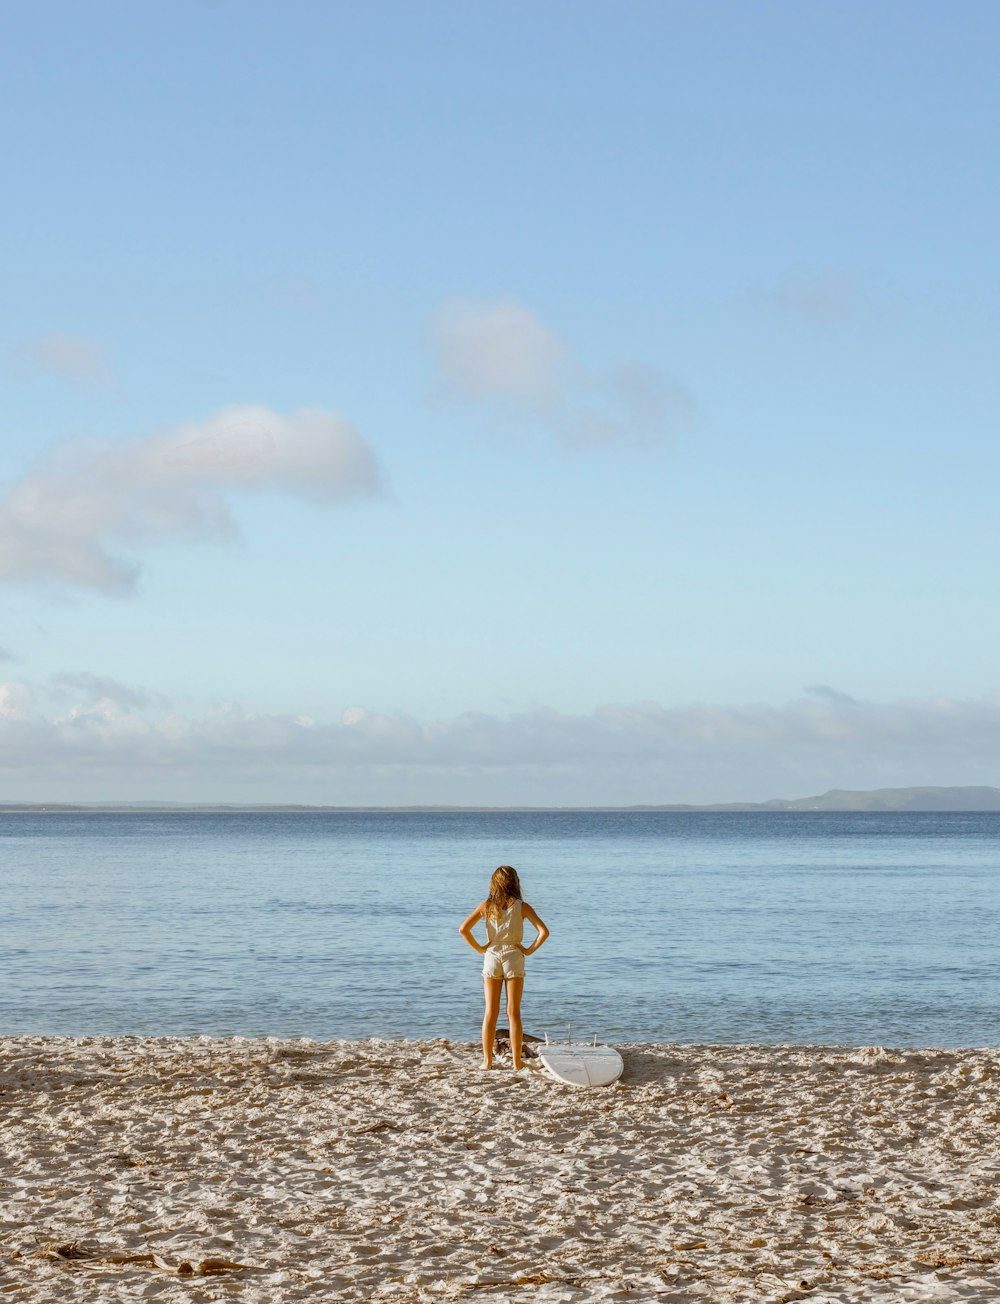 a woman standing on a beach next to a surfboard